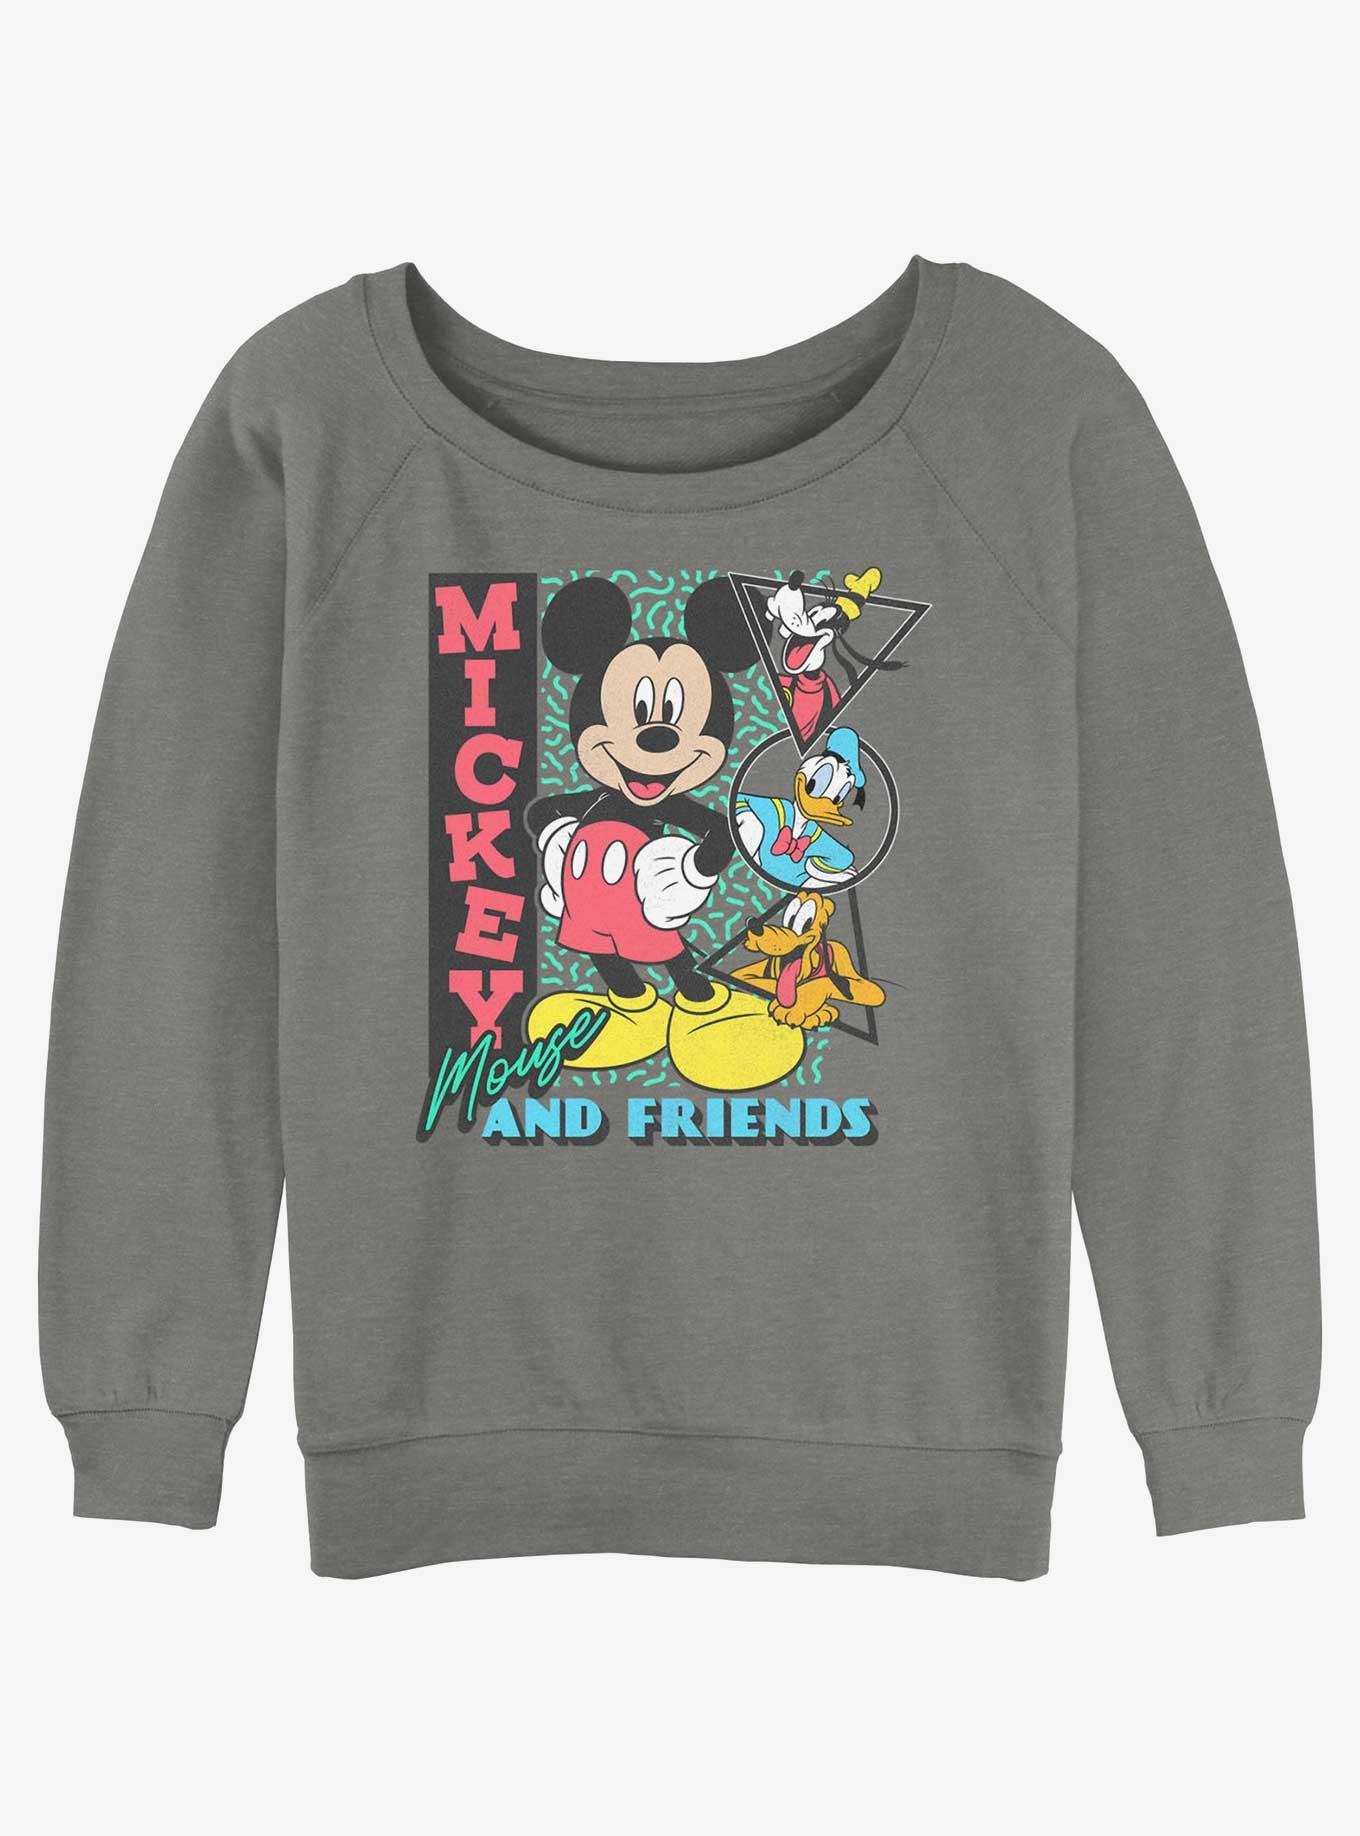 Disney Mickey Mouse & Friends Vintage Shapes Girls Slouchy Sweatshirt, GRAY HTR, hi-res